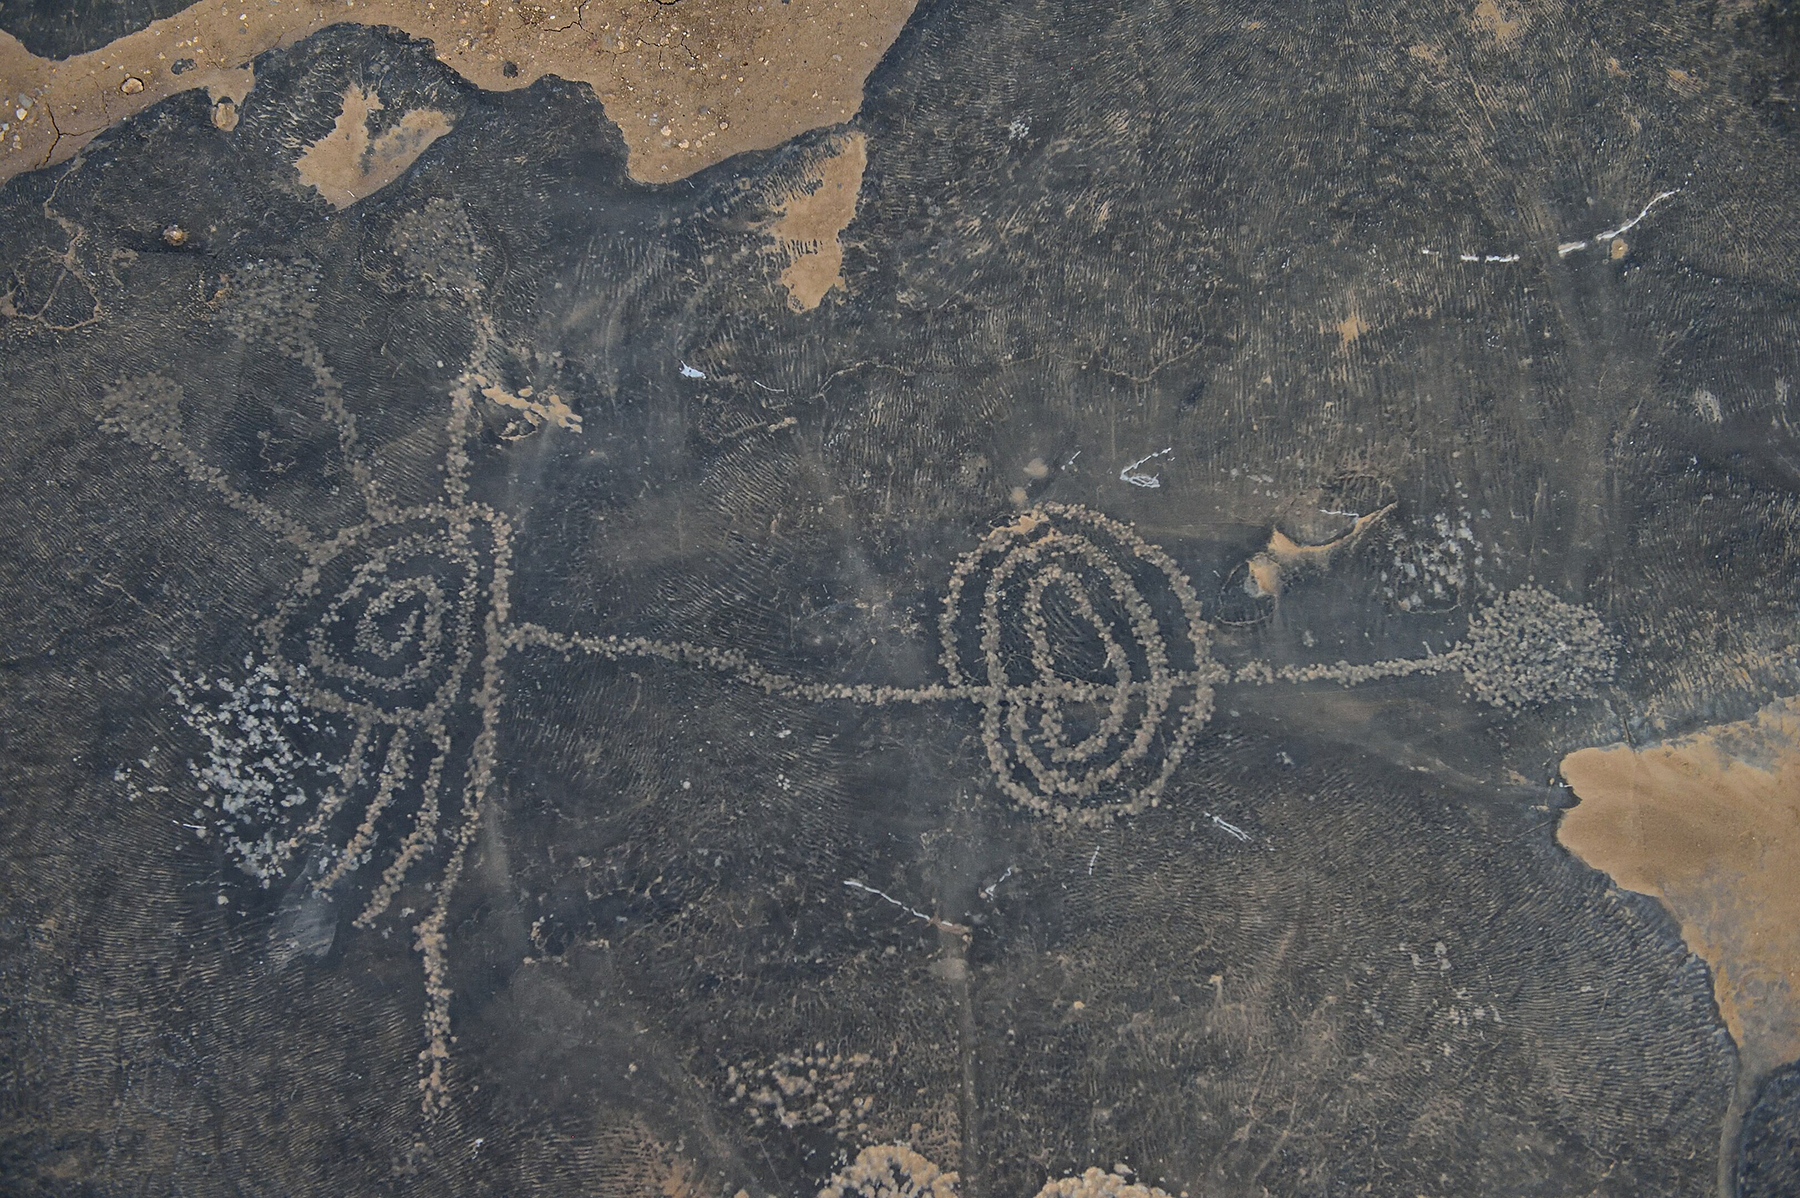 Rock art in Richtersveld National Park, showing a line with some circles